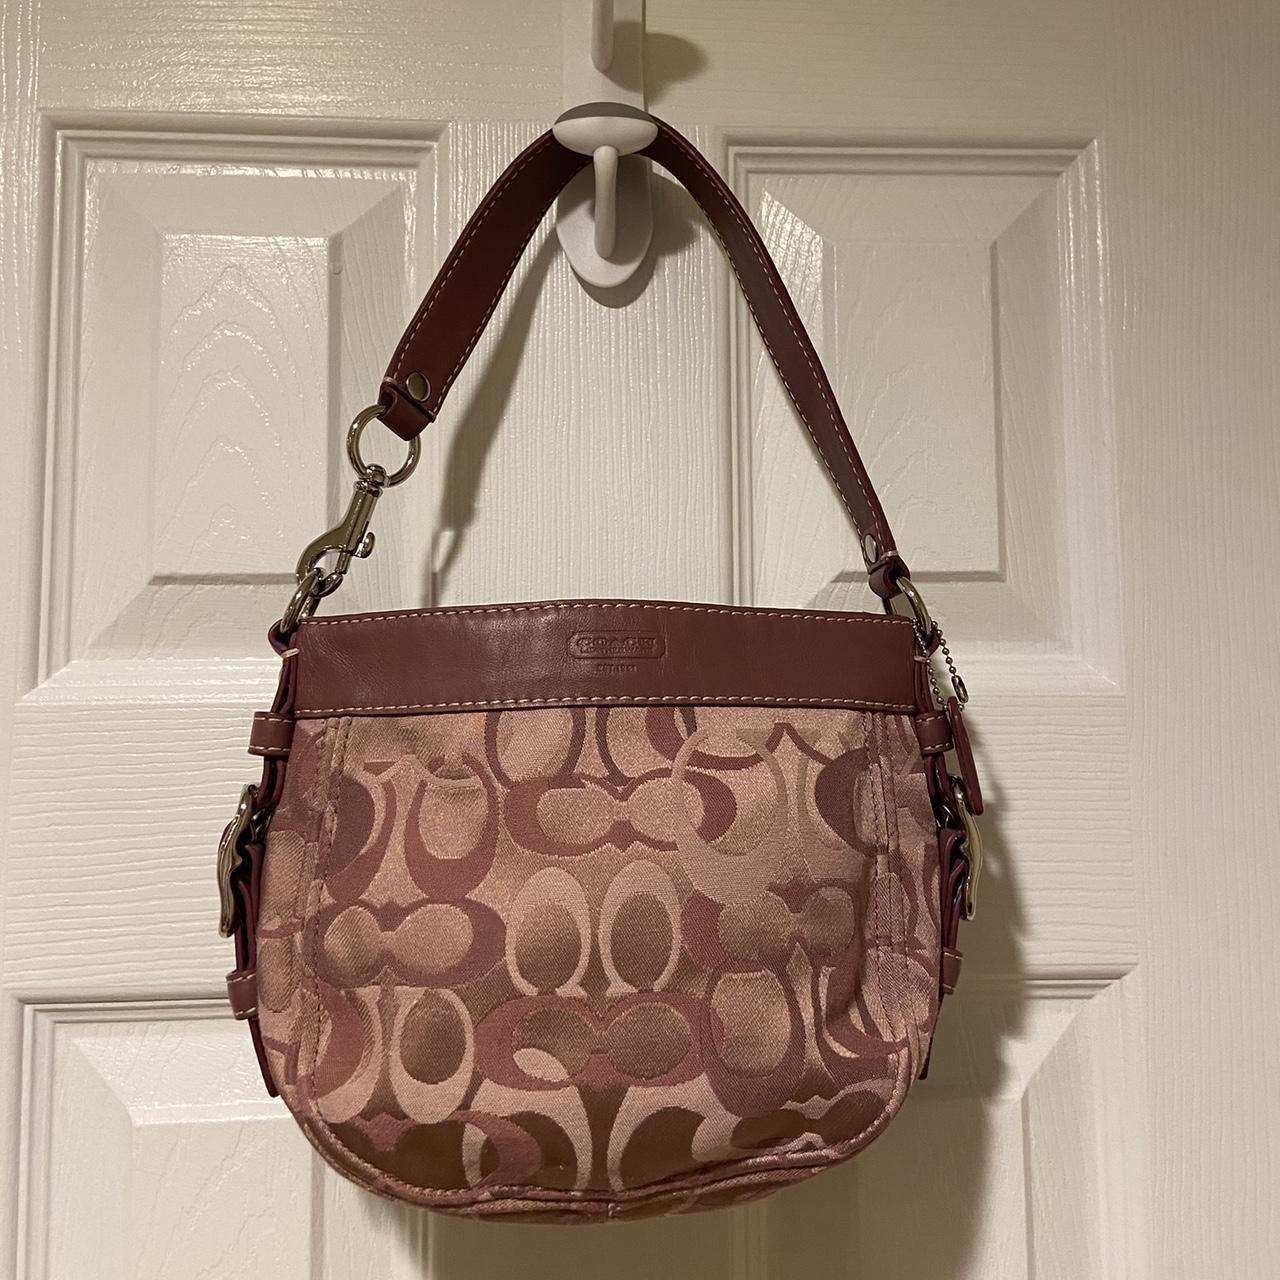 Pink Coach Purse - clothing & accessories - by owner - apparel sale -  craigslist